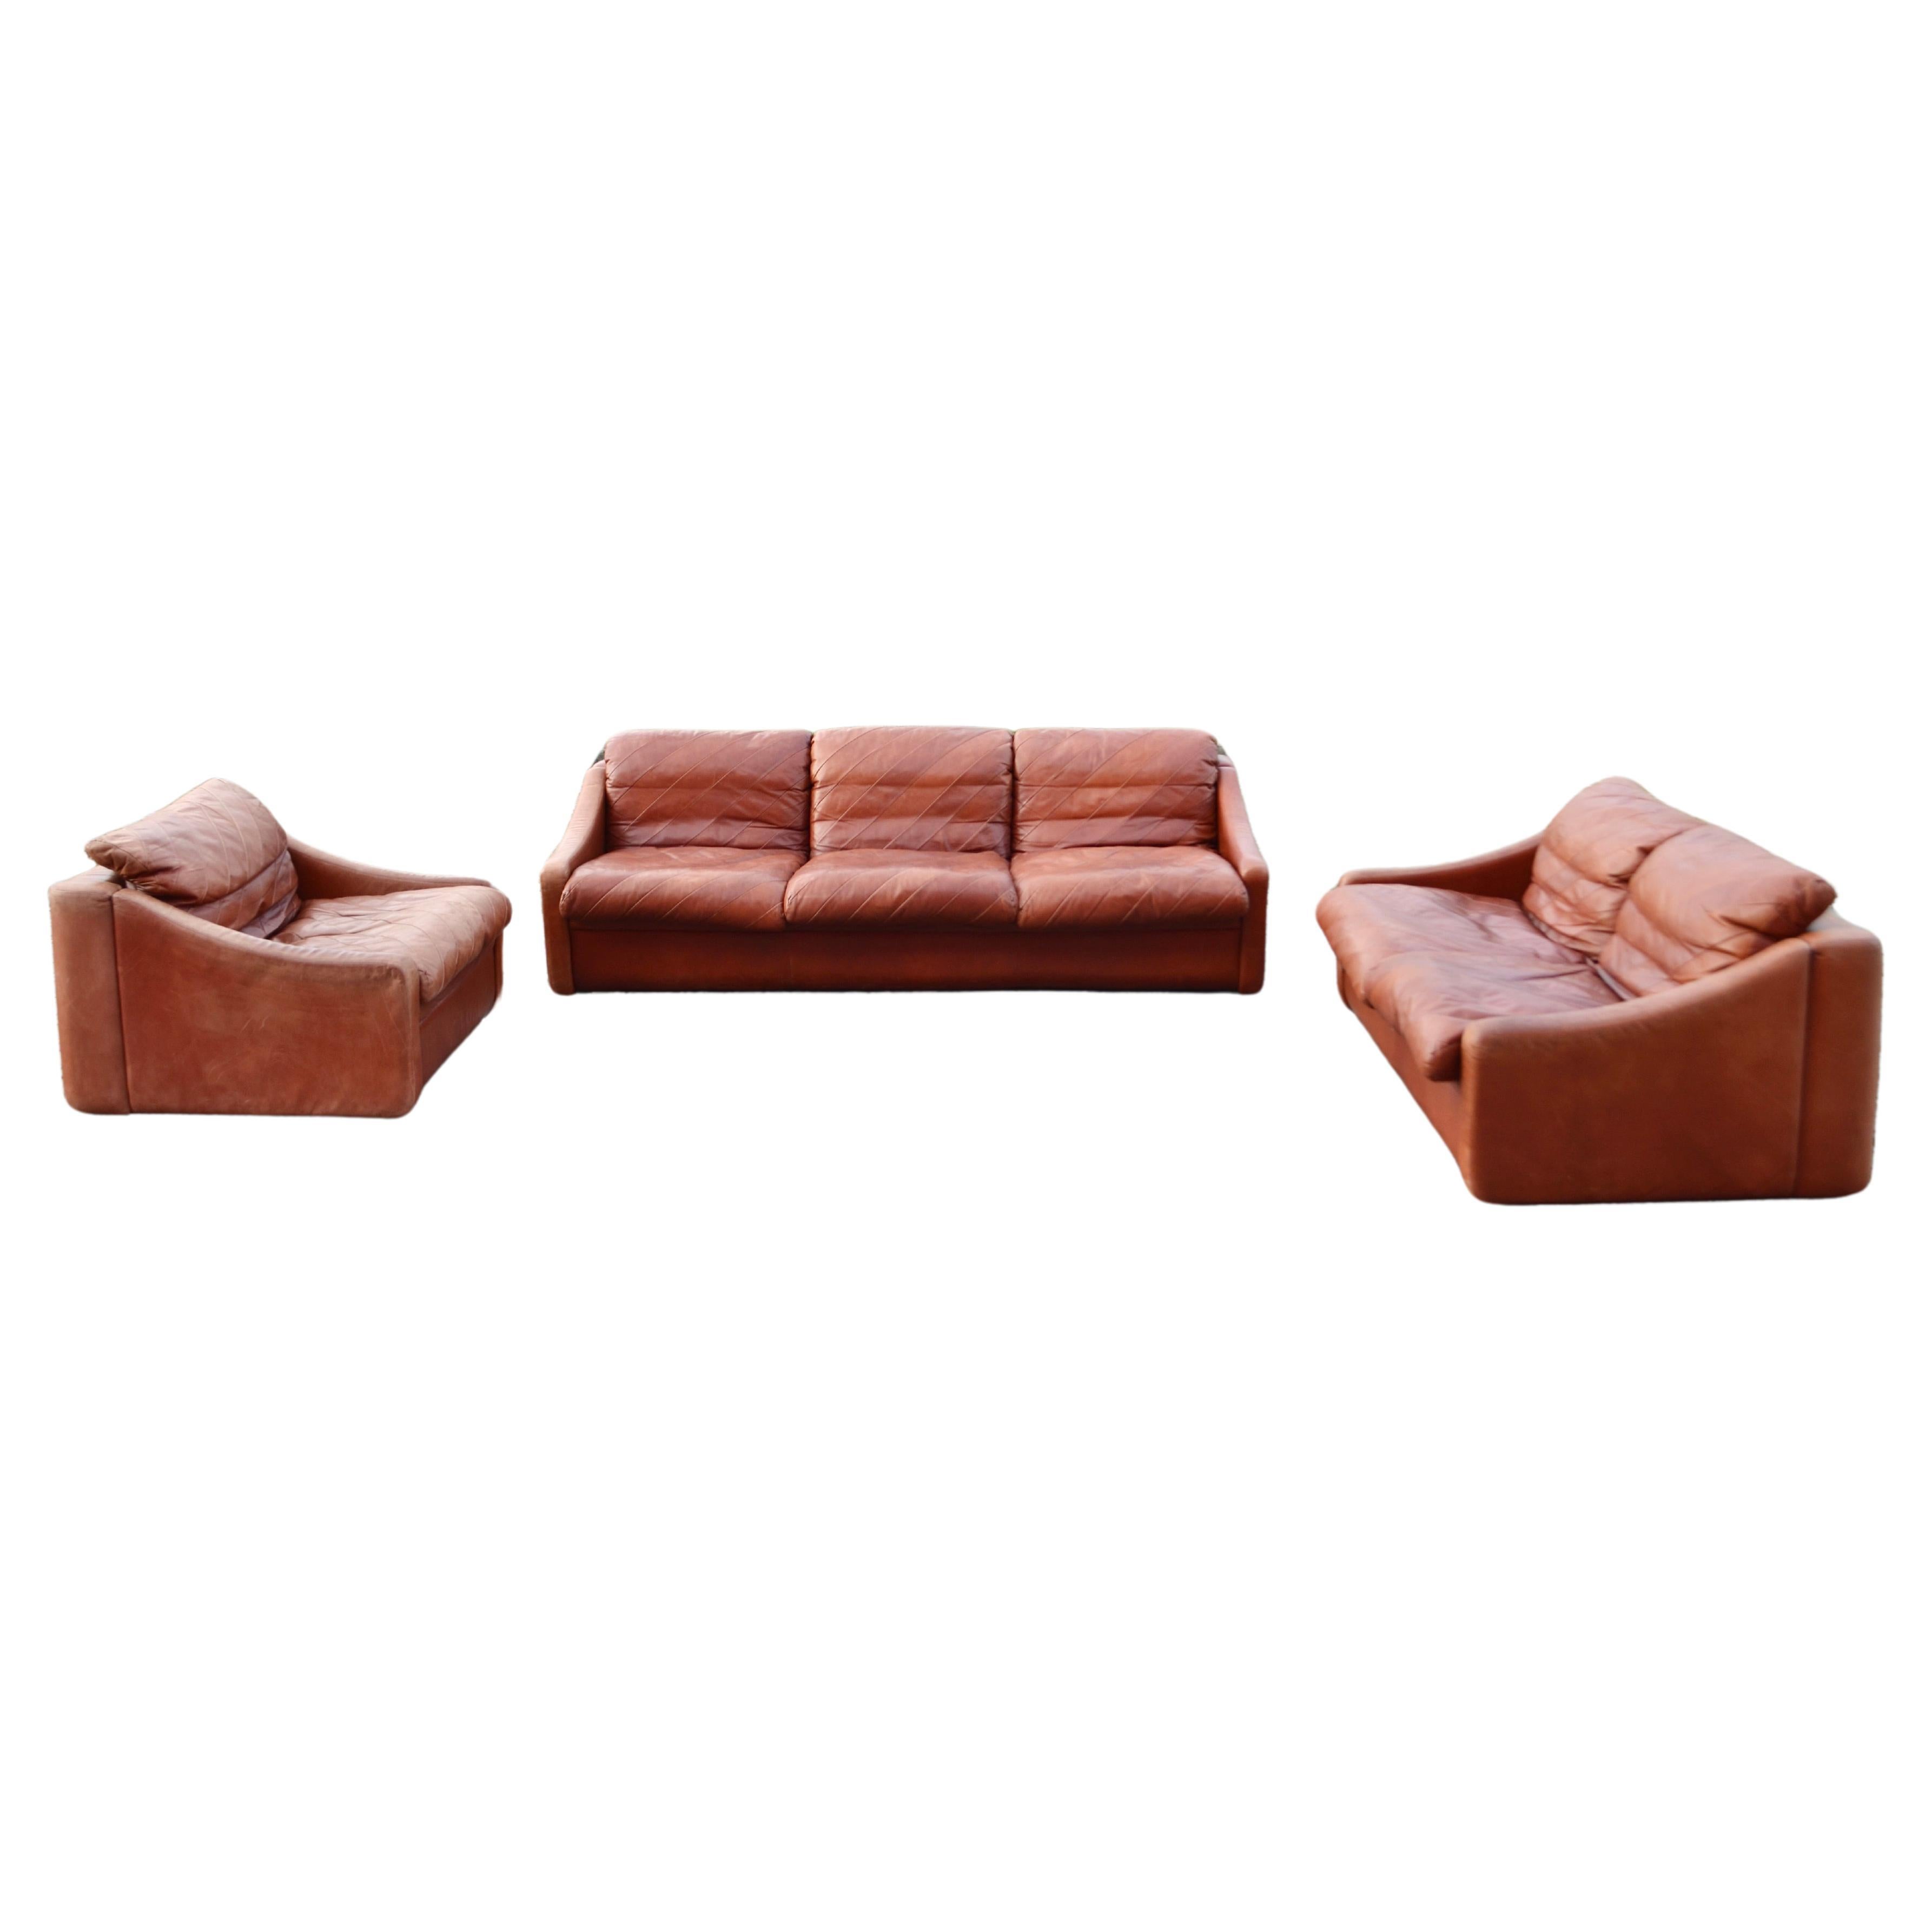 Rolf Benz Vintage Oxred Leather Living room Sofa Ensemble, Germany, 1970 For Sale